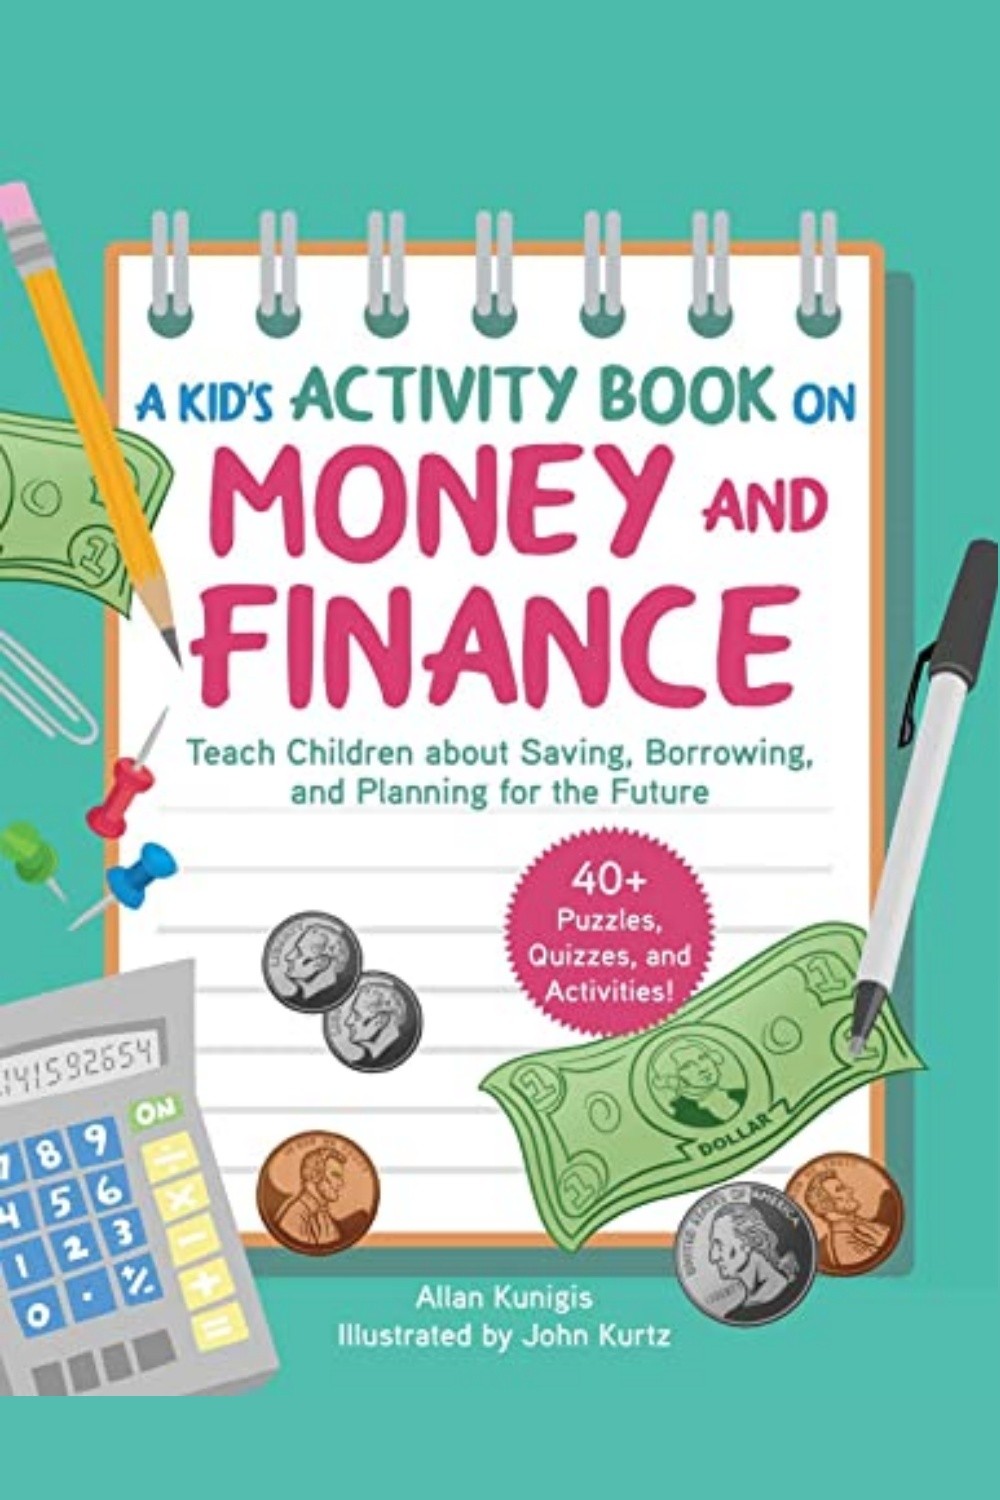 Kid's Activity Book on Money and Finance